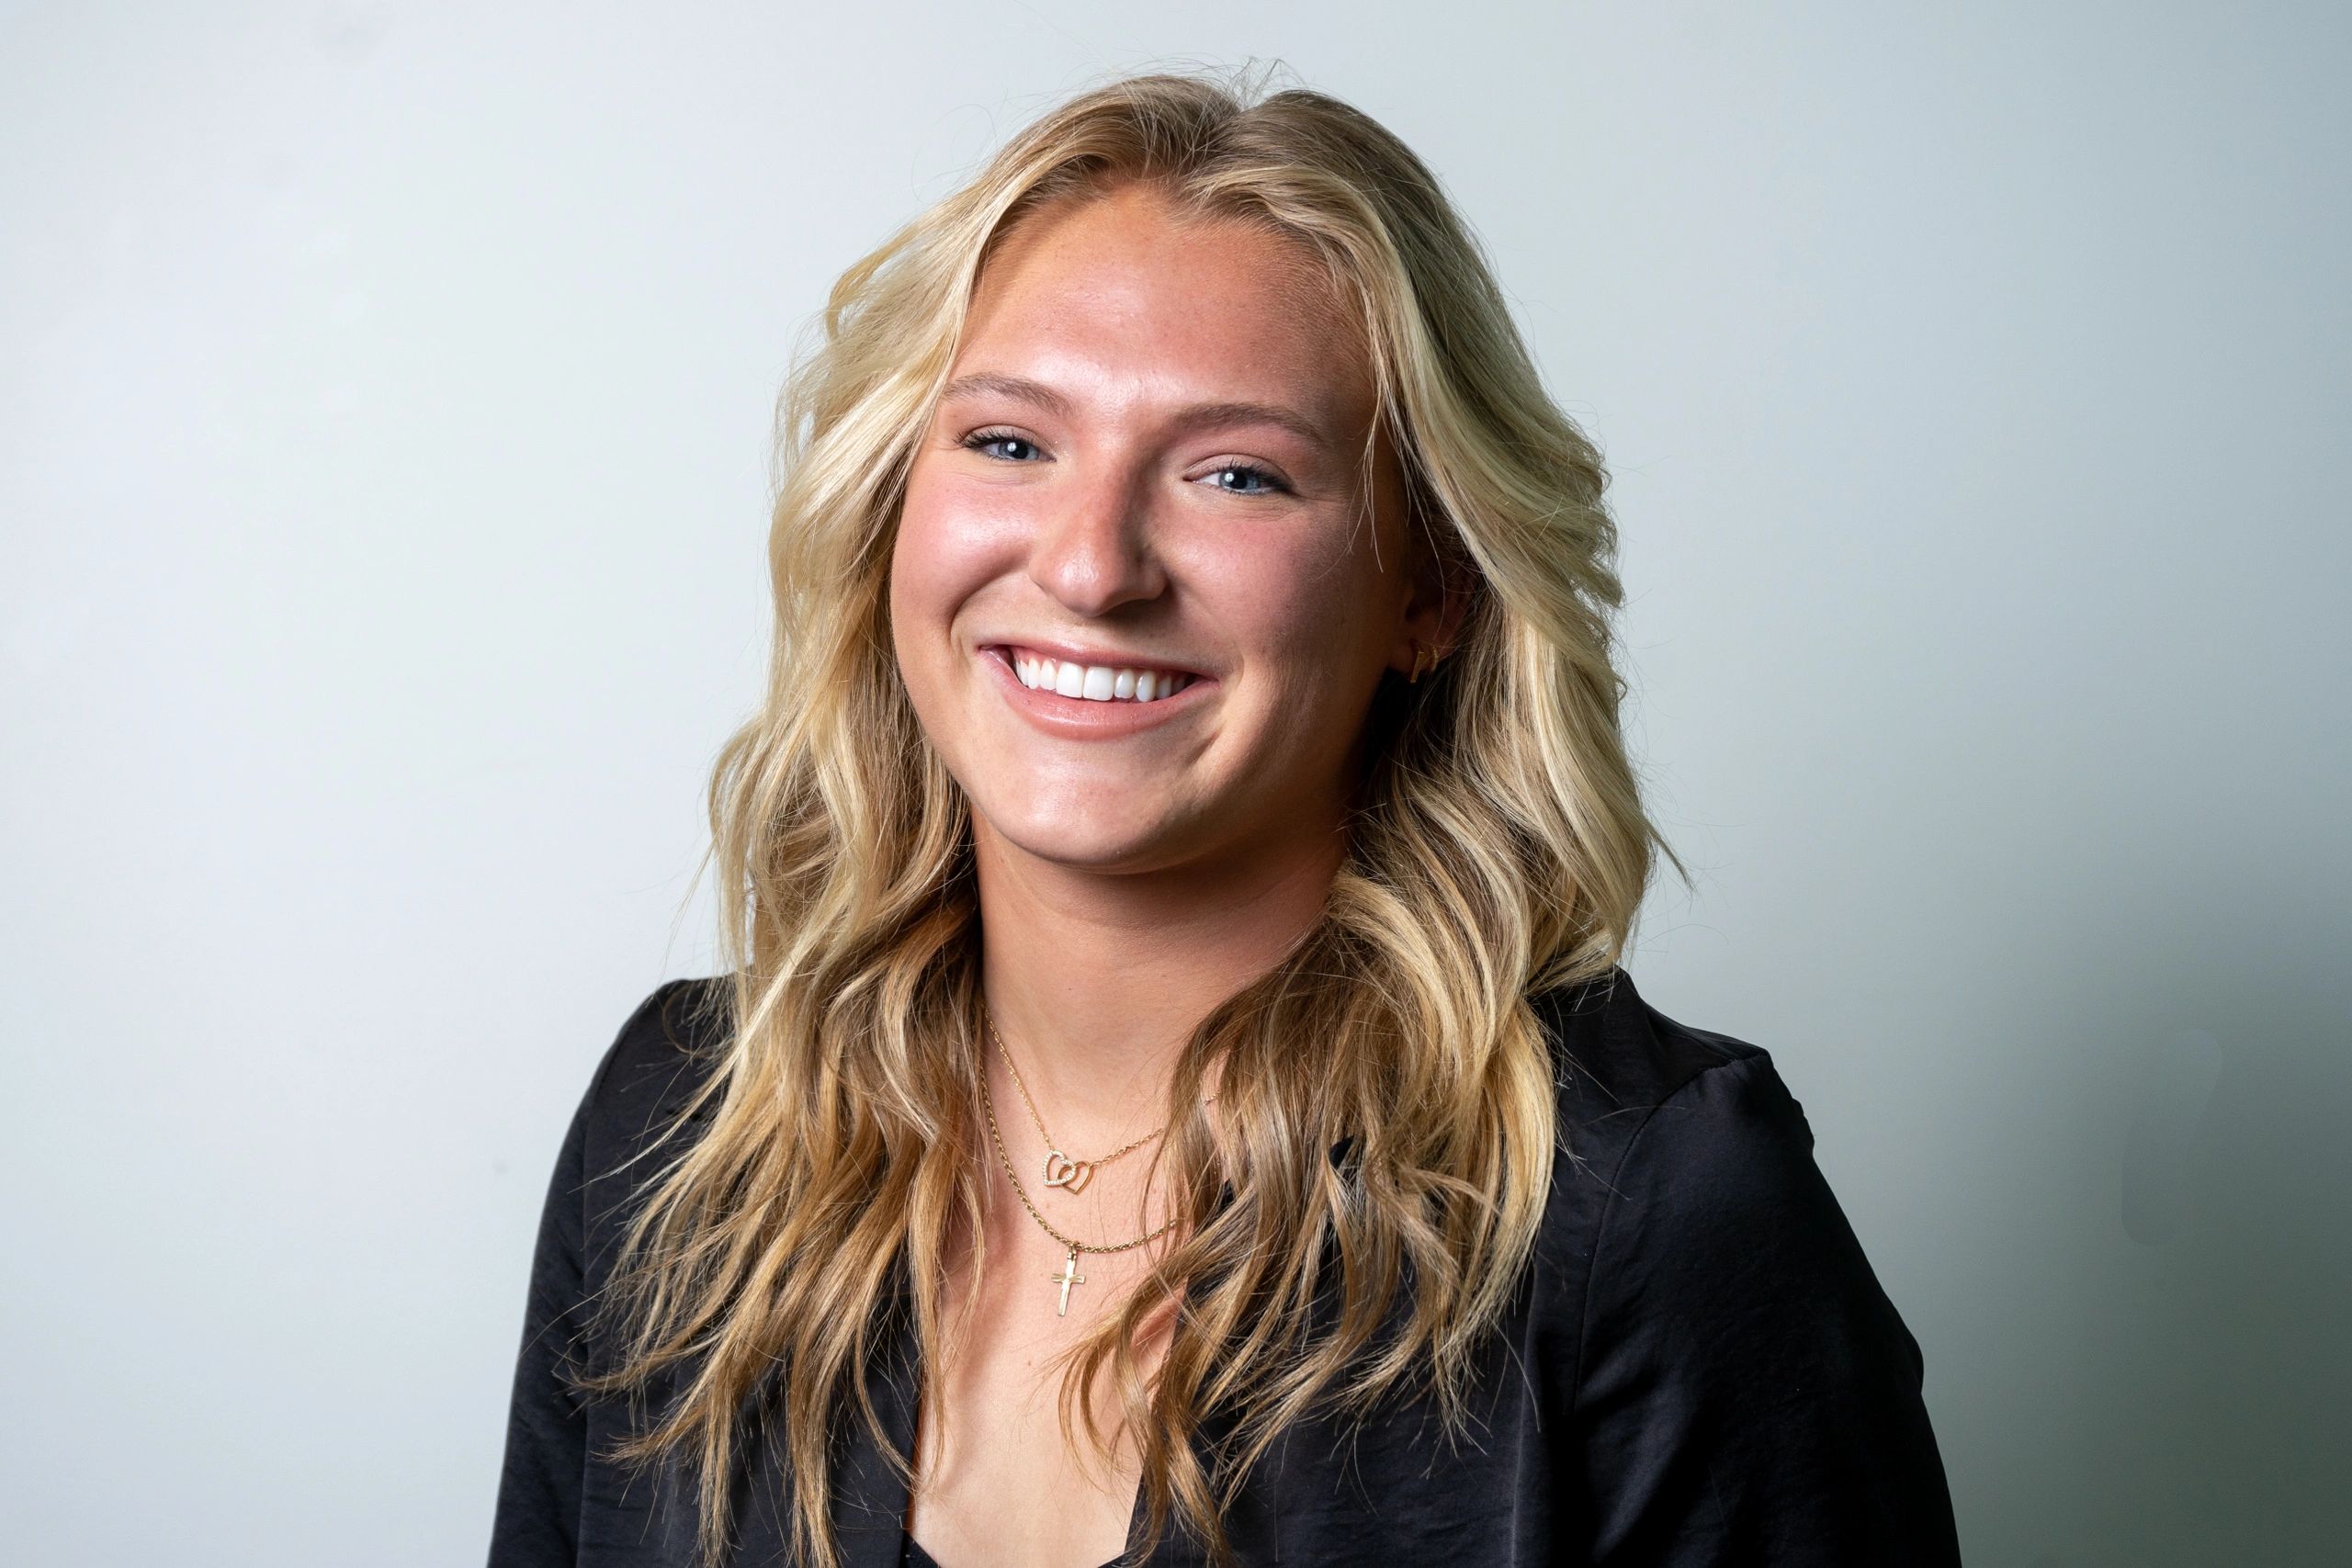 Kate Fitzgerald headshot
ASU beach volleyball player and business owner